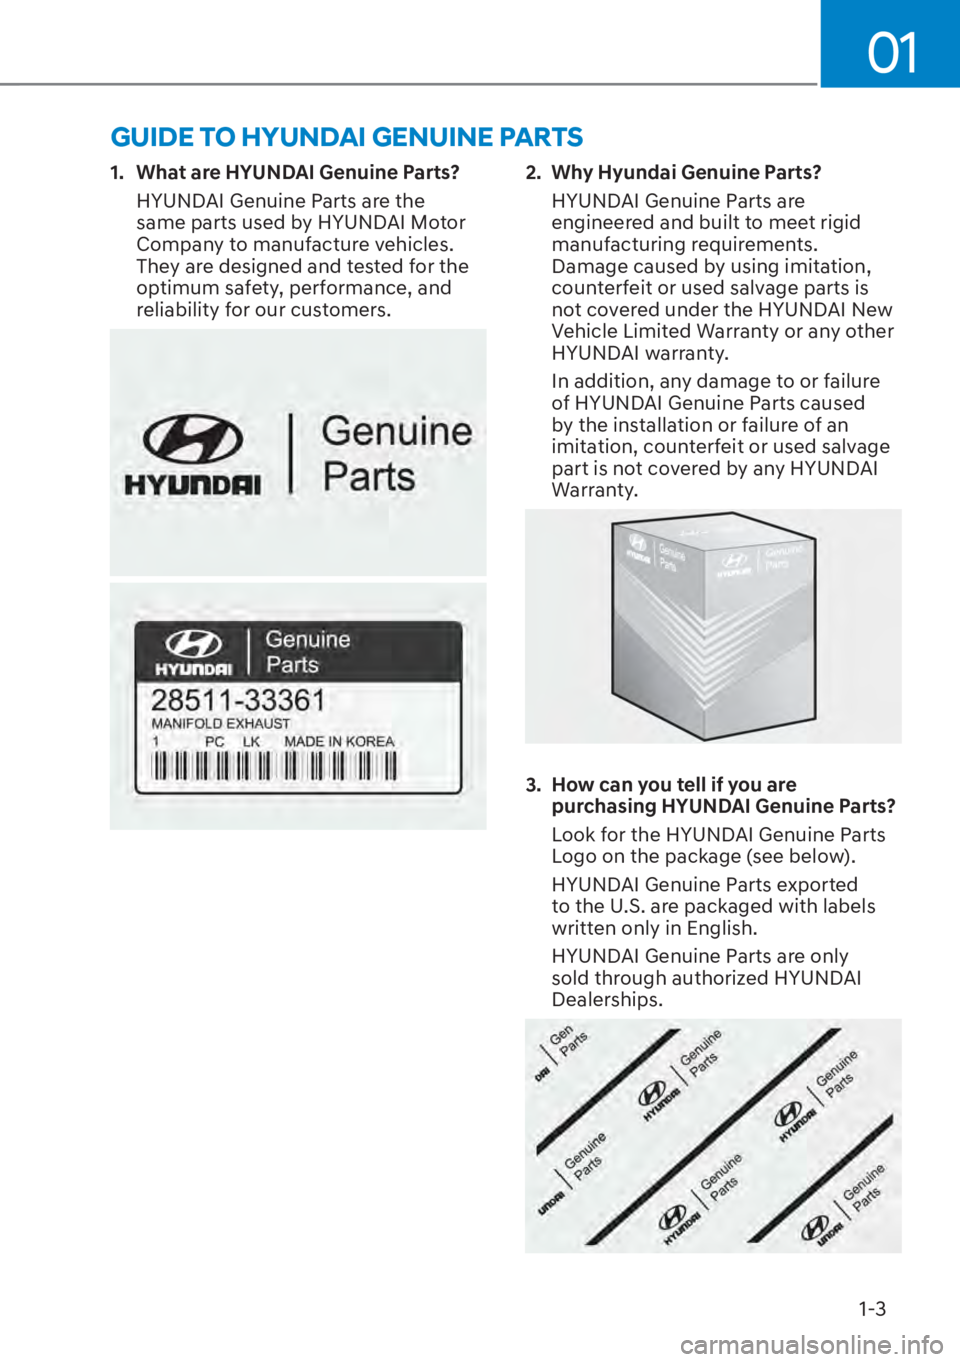 HYUNDAI SANTA FE HYBRID 2023  Owners Manual 01
1-3
GUIDE TO HYUNDAI GENUINE PARTS
1.  What are HYUNDAI Genuine Parts?HYUNDAI Genuine Parts are the 
same parts used by HYUNDAI Motor 
Company to manufacture vehicles. 
They are designed and tested